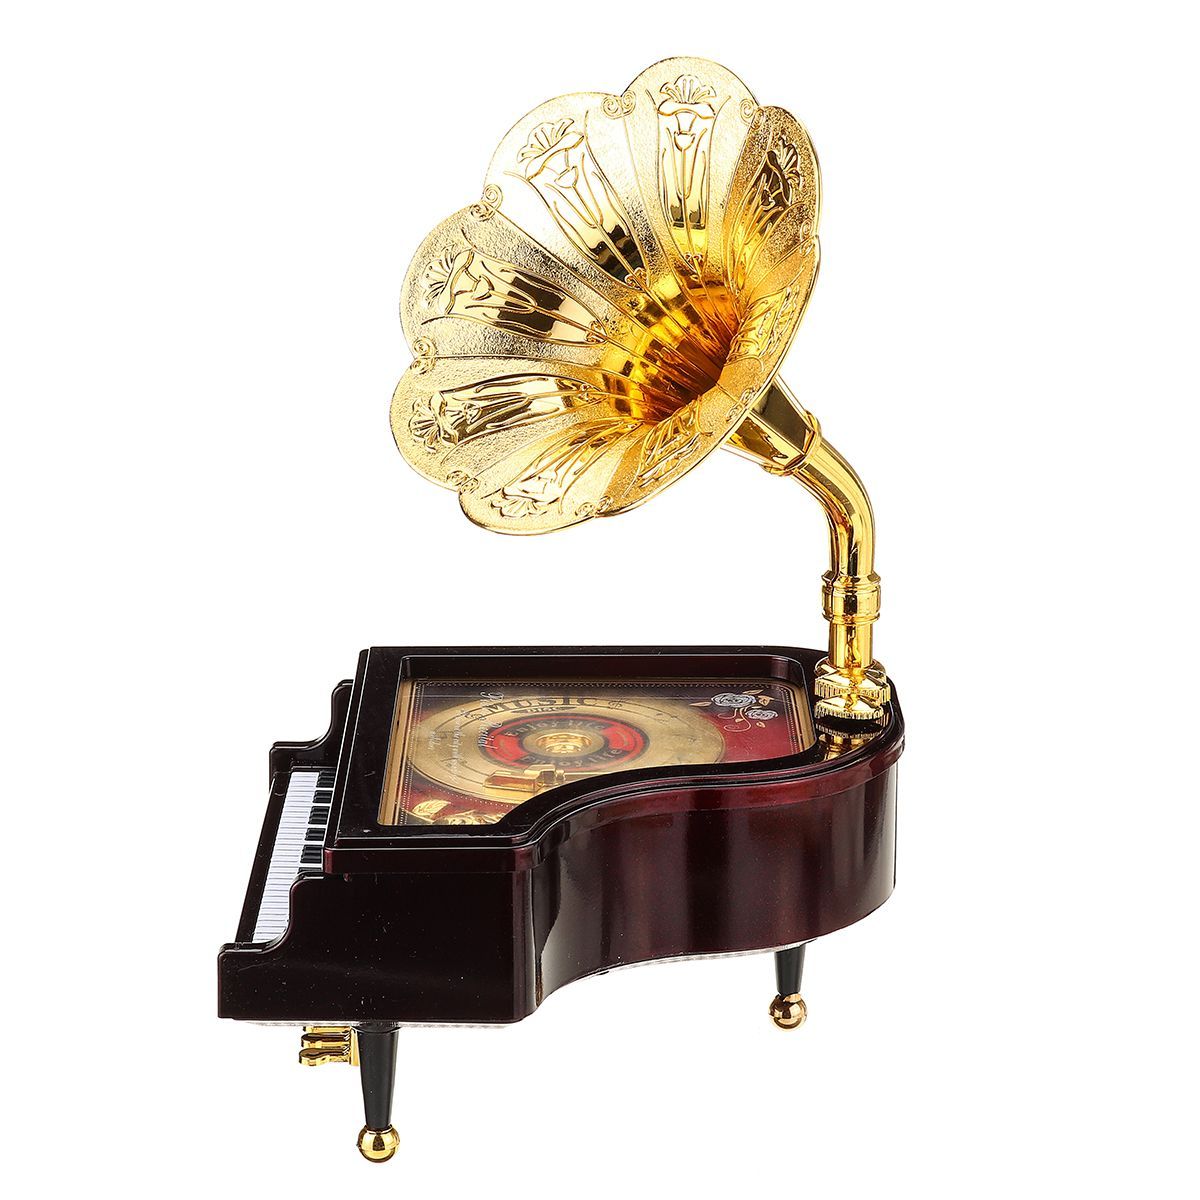 Vintage-Retro-Piano-Phonograph-Gold-Trumpet-Horn-Music-Box-Home-Decorations-1619763